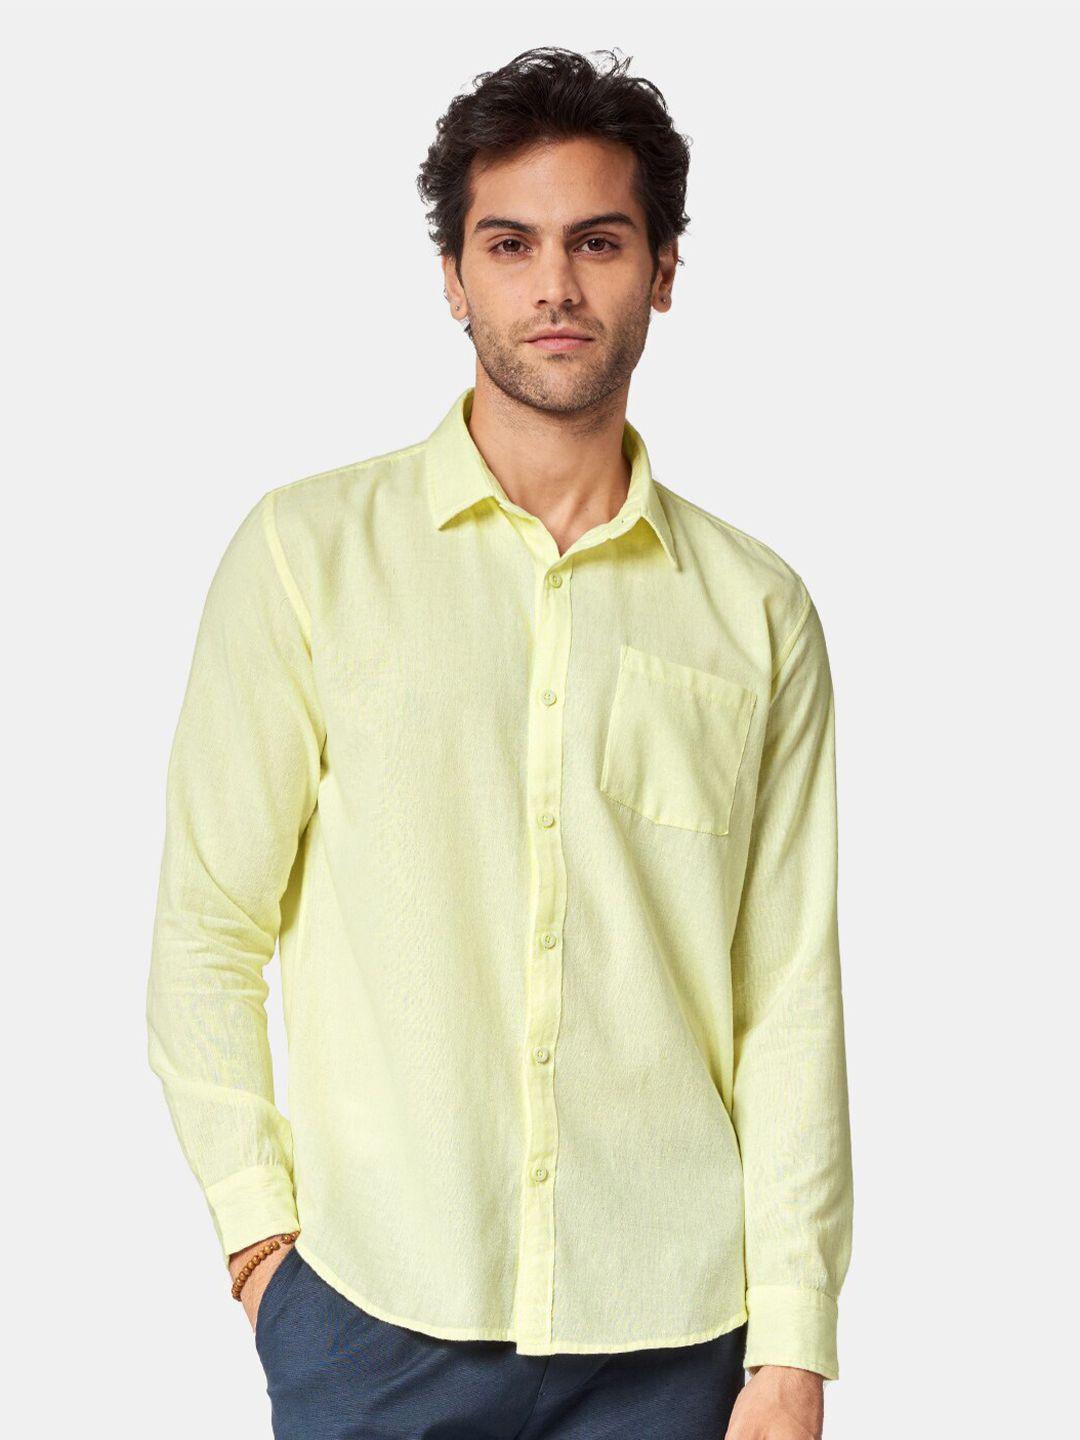 the souled store men regular fit solid cotton casual shirt